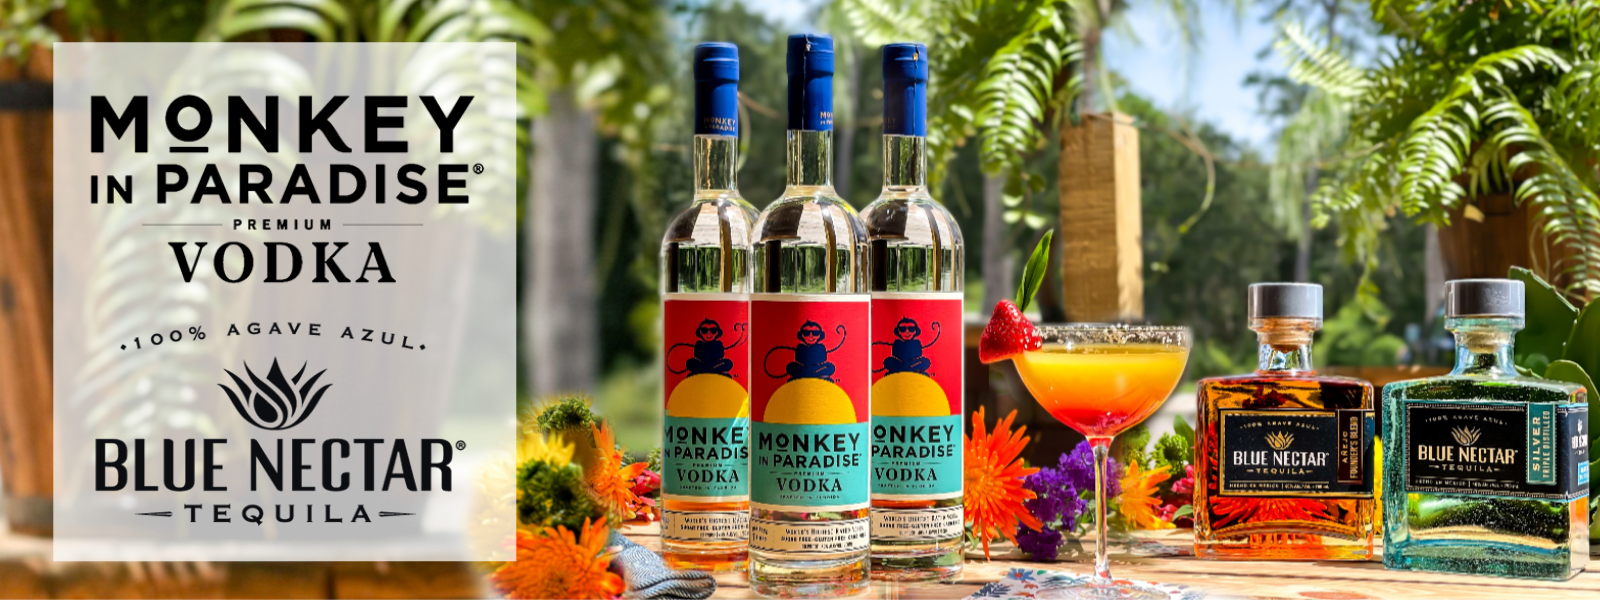 Buy Monkey and Paradise Vodka & Blue Nectar Tequila Online at CaskCartel.com